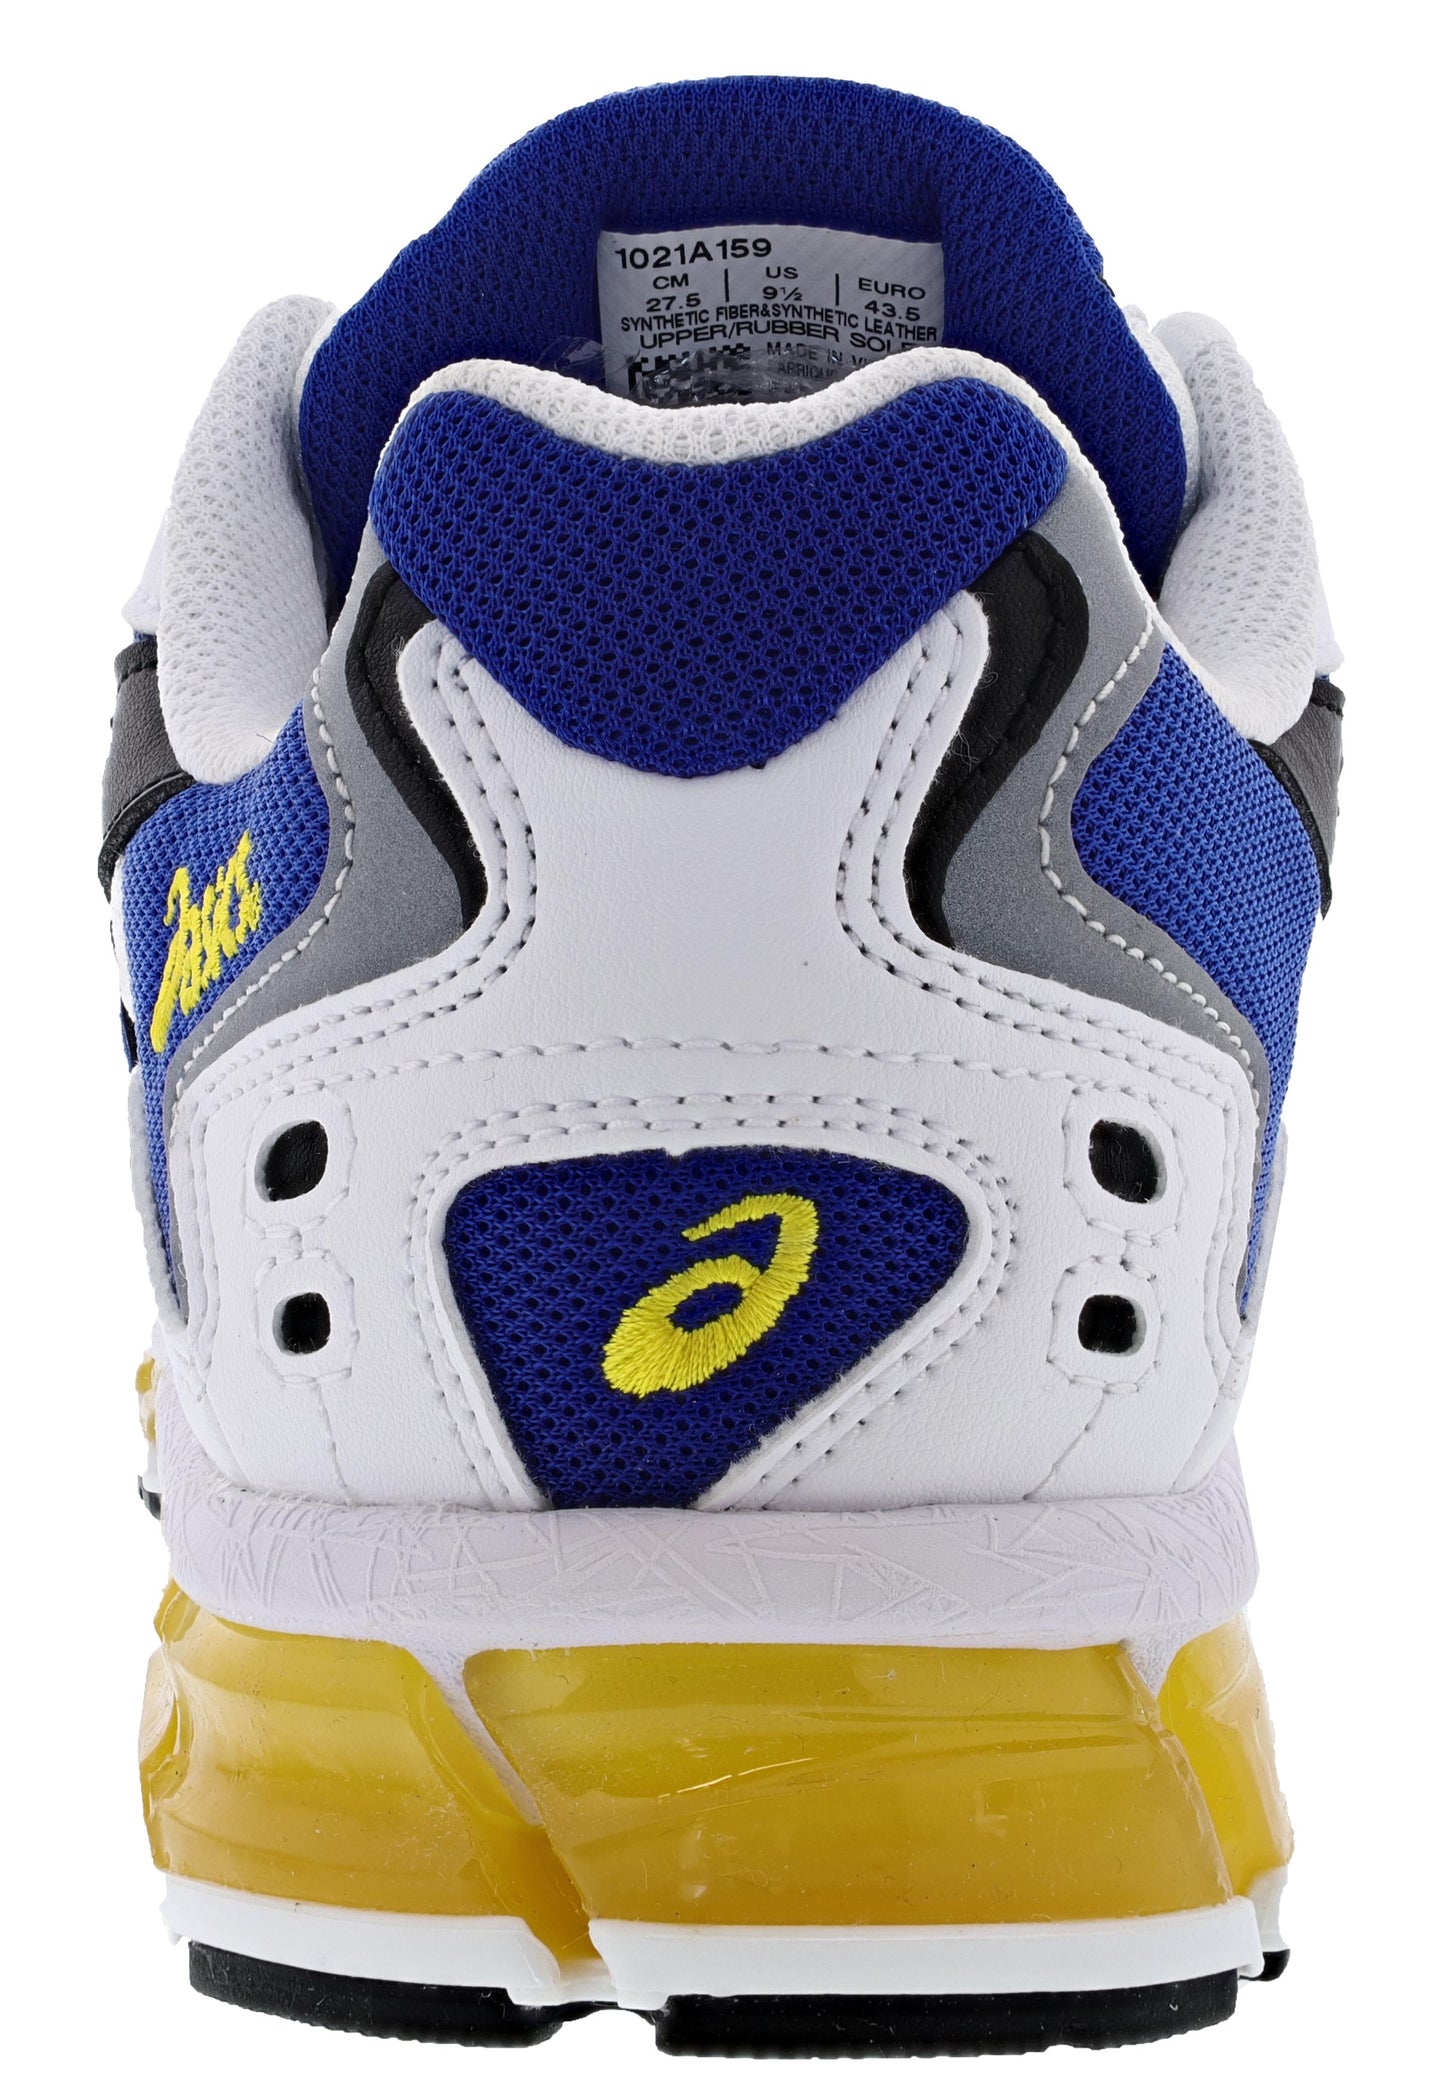 
                  
                    Back of White with Black and Blue accents ASICS Men's Cushioned Running Shoes Gel Kayano 5 360
                  
                